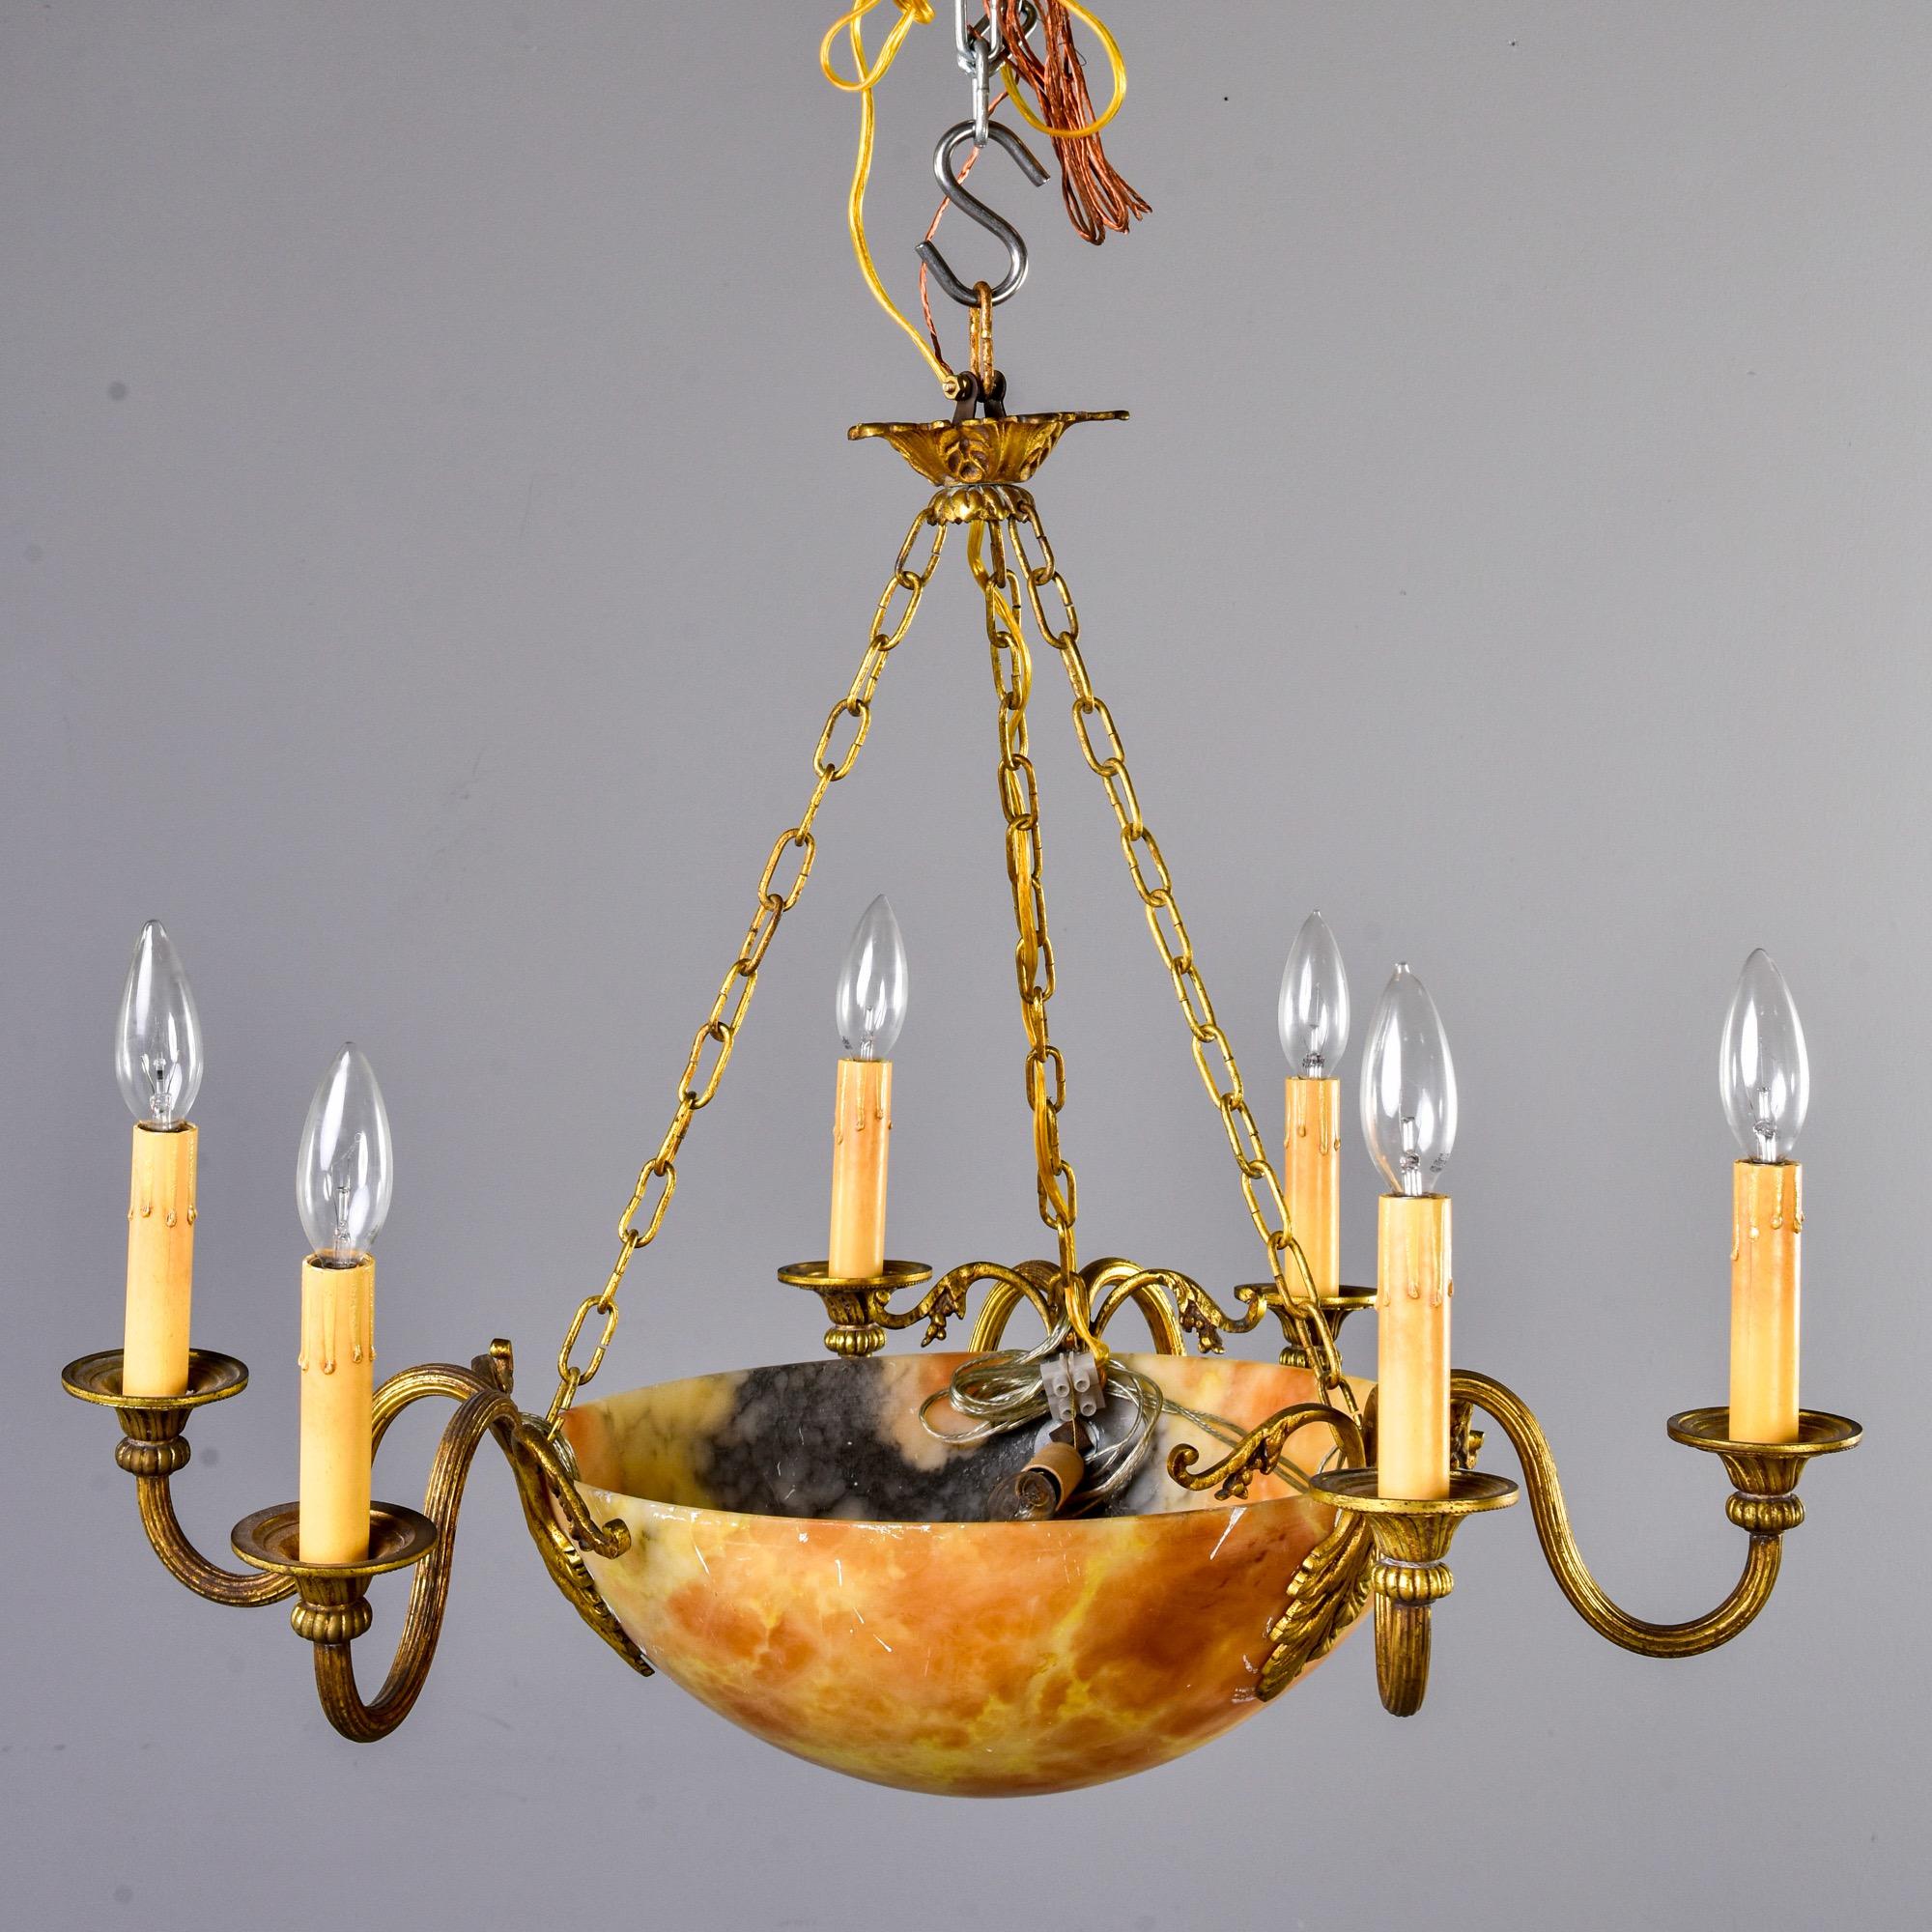 Found in France, this alabaster and brass light fixture dates from the early 20th century - circa 1910. Alabaster bowl has apricot and cream tones with some gray accents. Brass candle arms and ceiling canopy have acanthus leaf motif. Seven